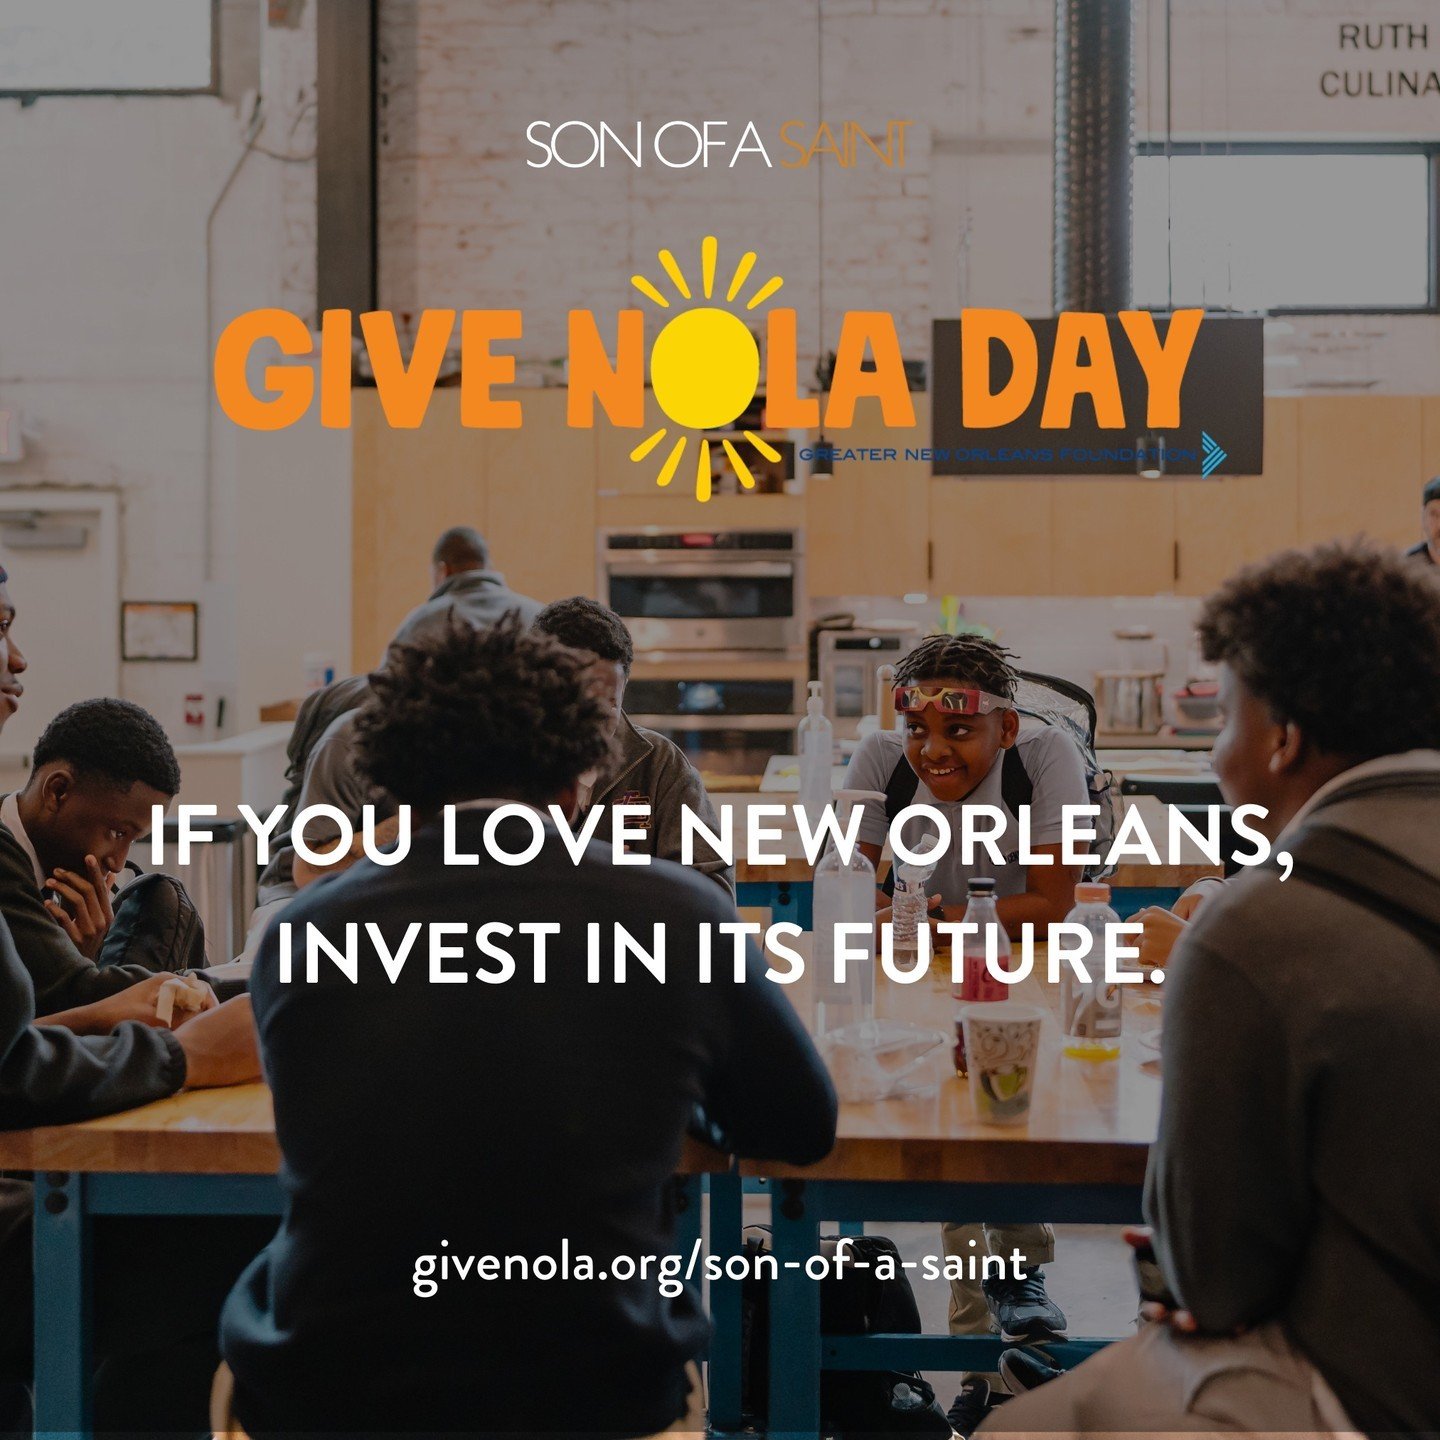 Son of a Saint is proud to reengage with the community on GiveNOLA Day and participate in this uniquely special 24-hour fundraising event hosted by the Greater New Orleans Foundation. 

This is the time to inspire people to give generously to the non